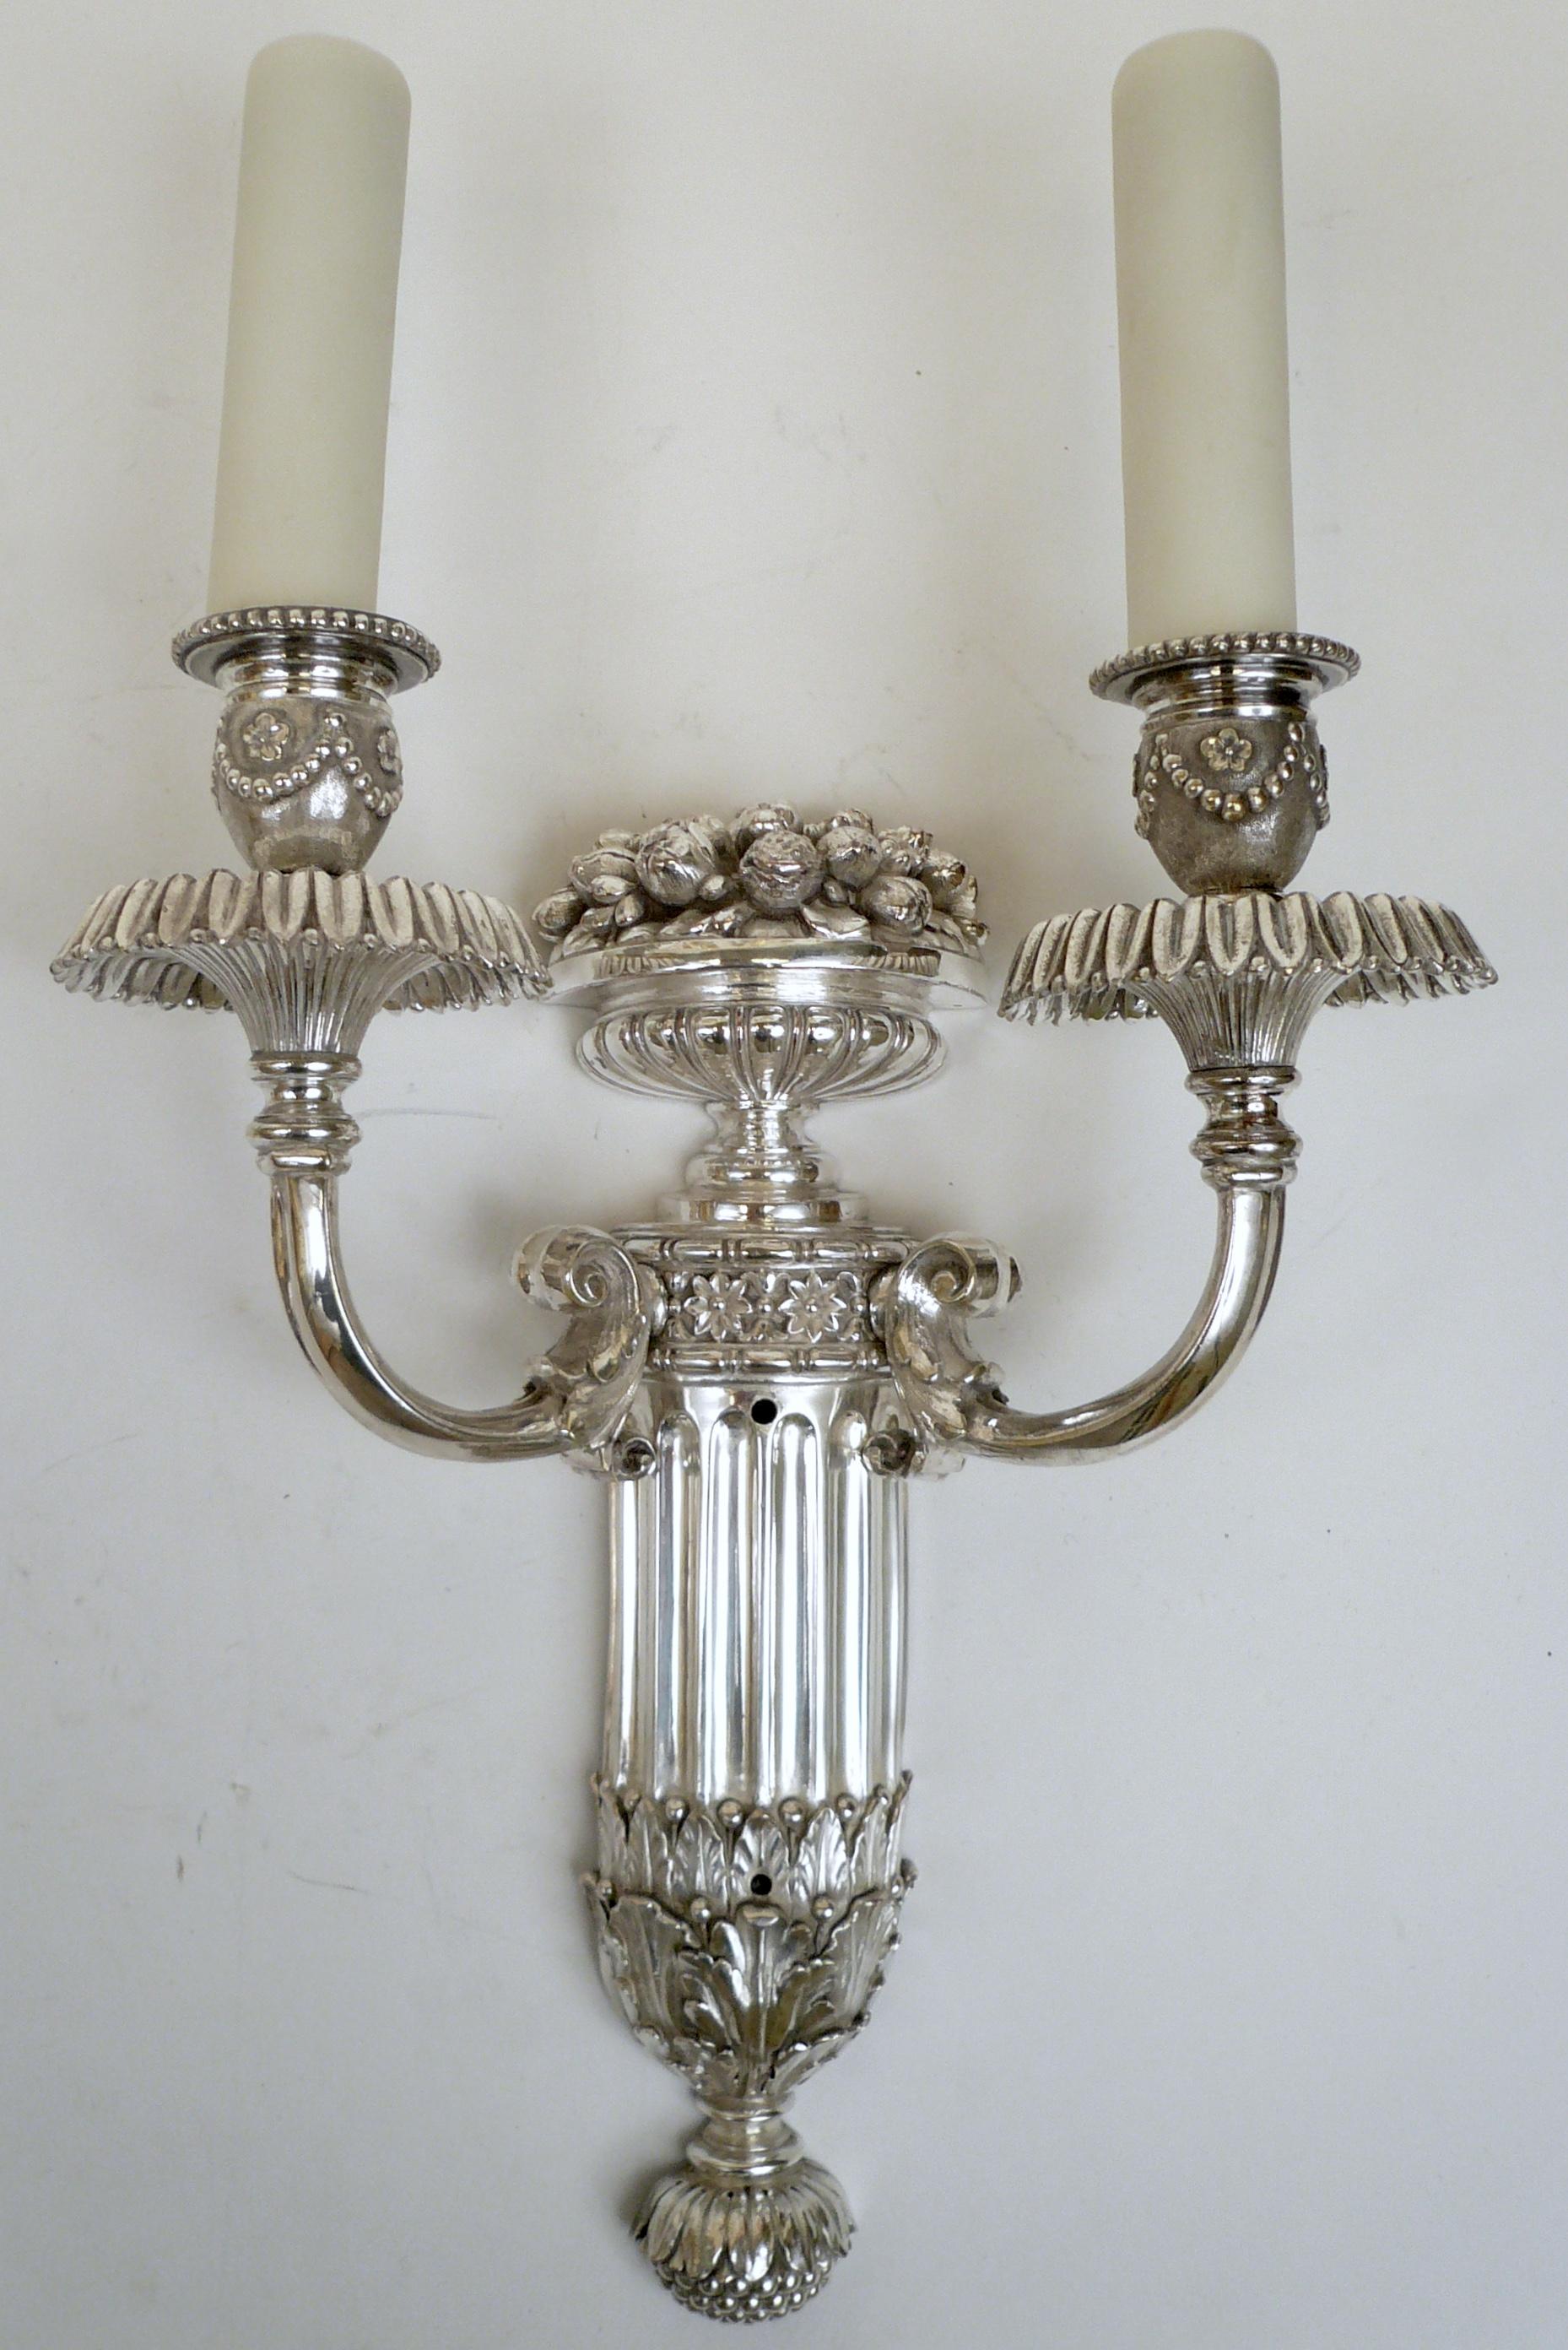 This finely detailed pair of Caldwell sconces feature classical motifs including acanthus leaves, swags, and rosettes.